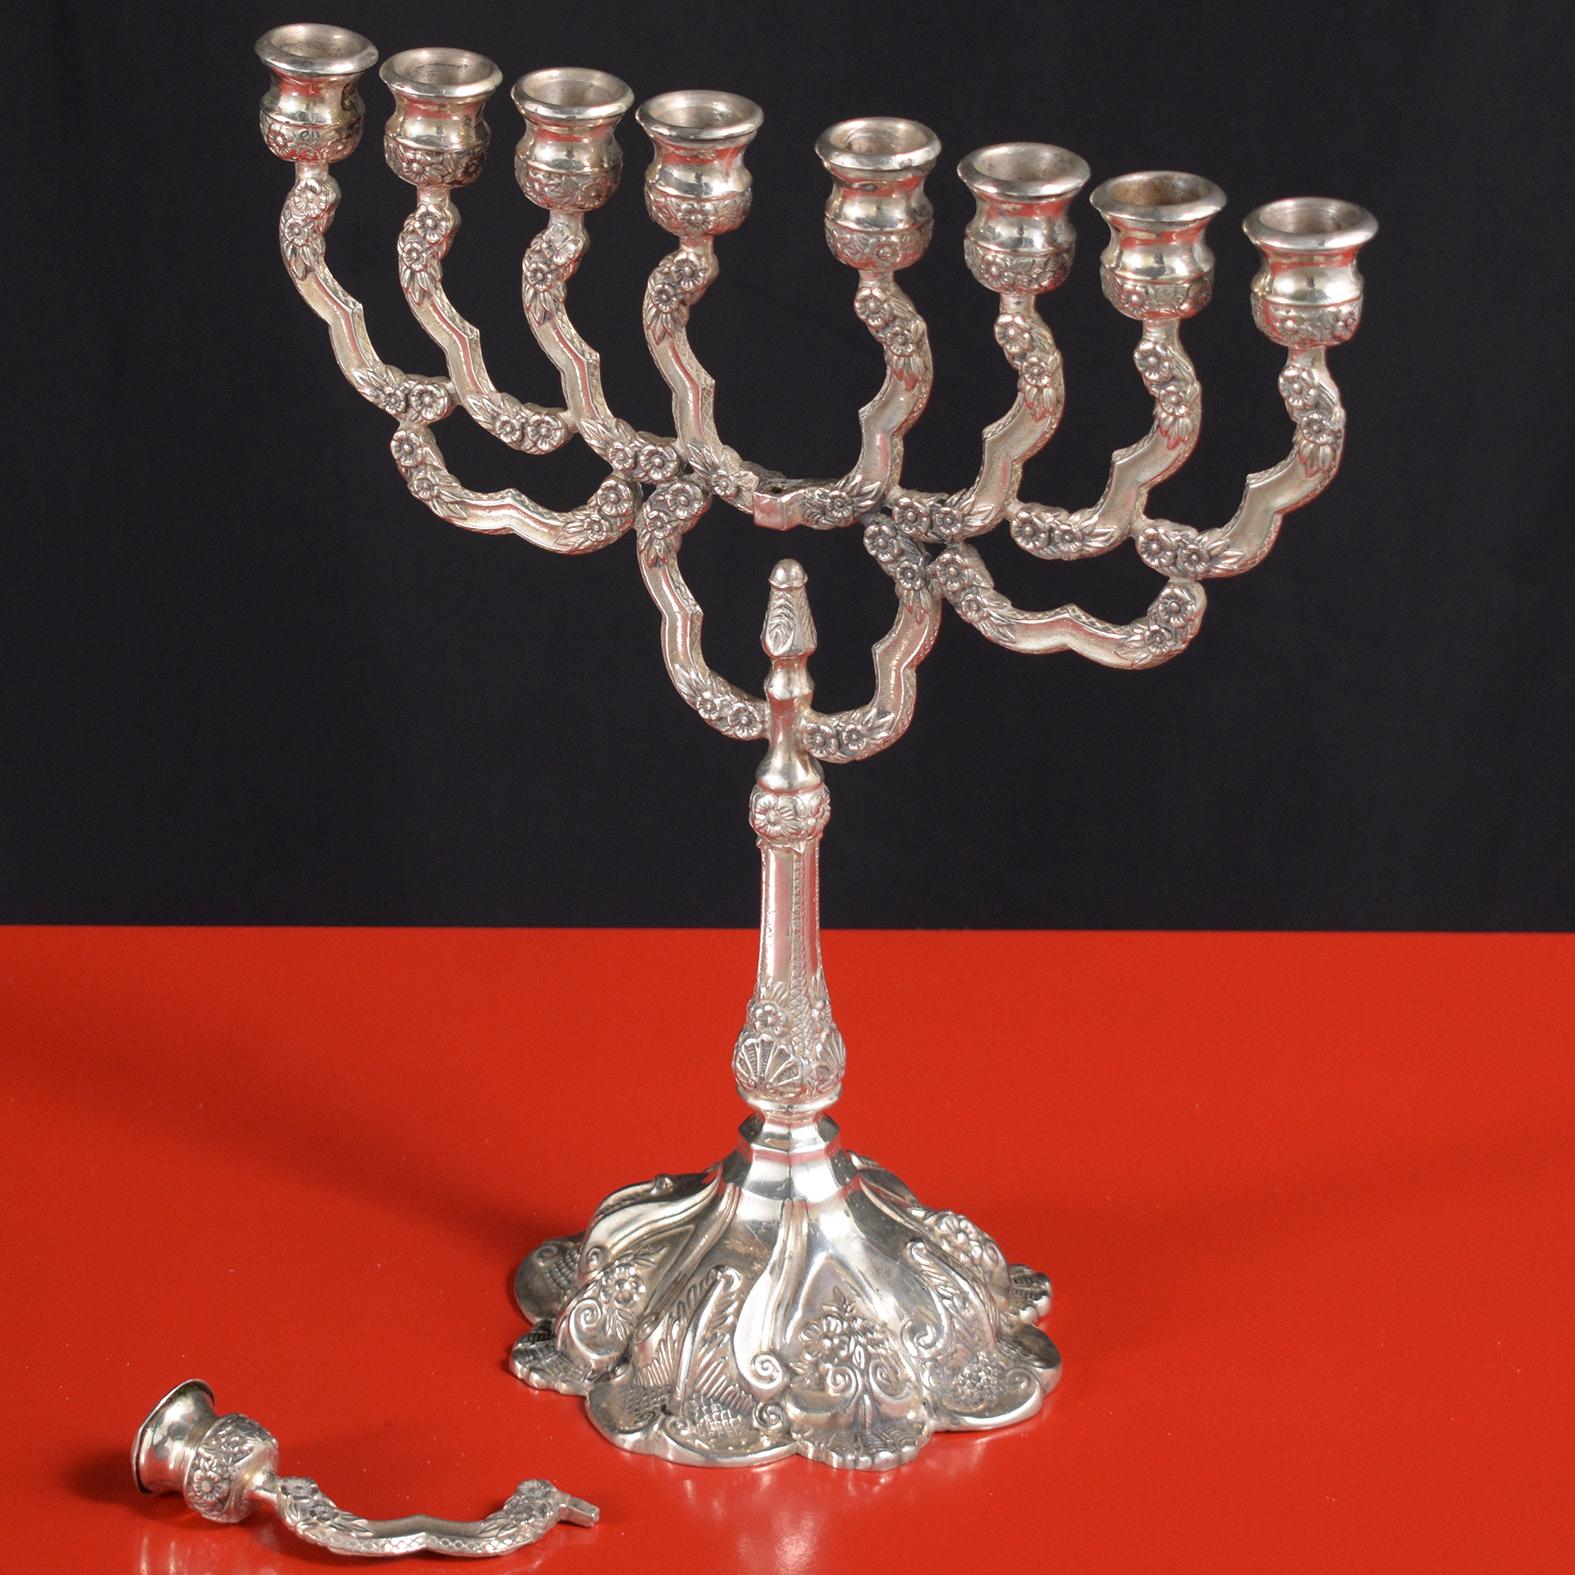 Carved Timeless Sterling Silver Menorah from Israel with Floral Motif